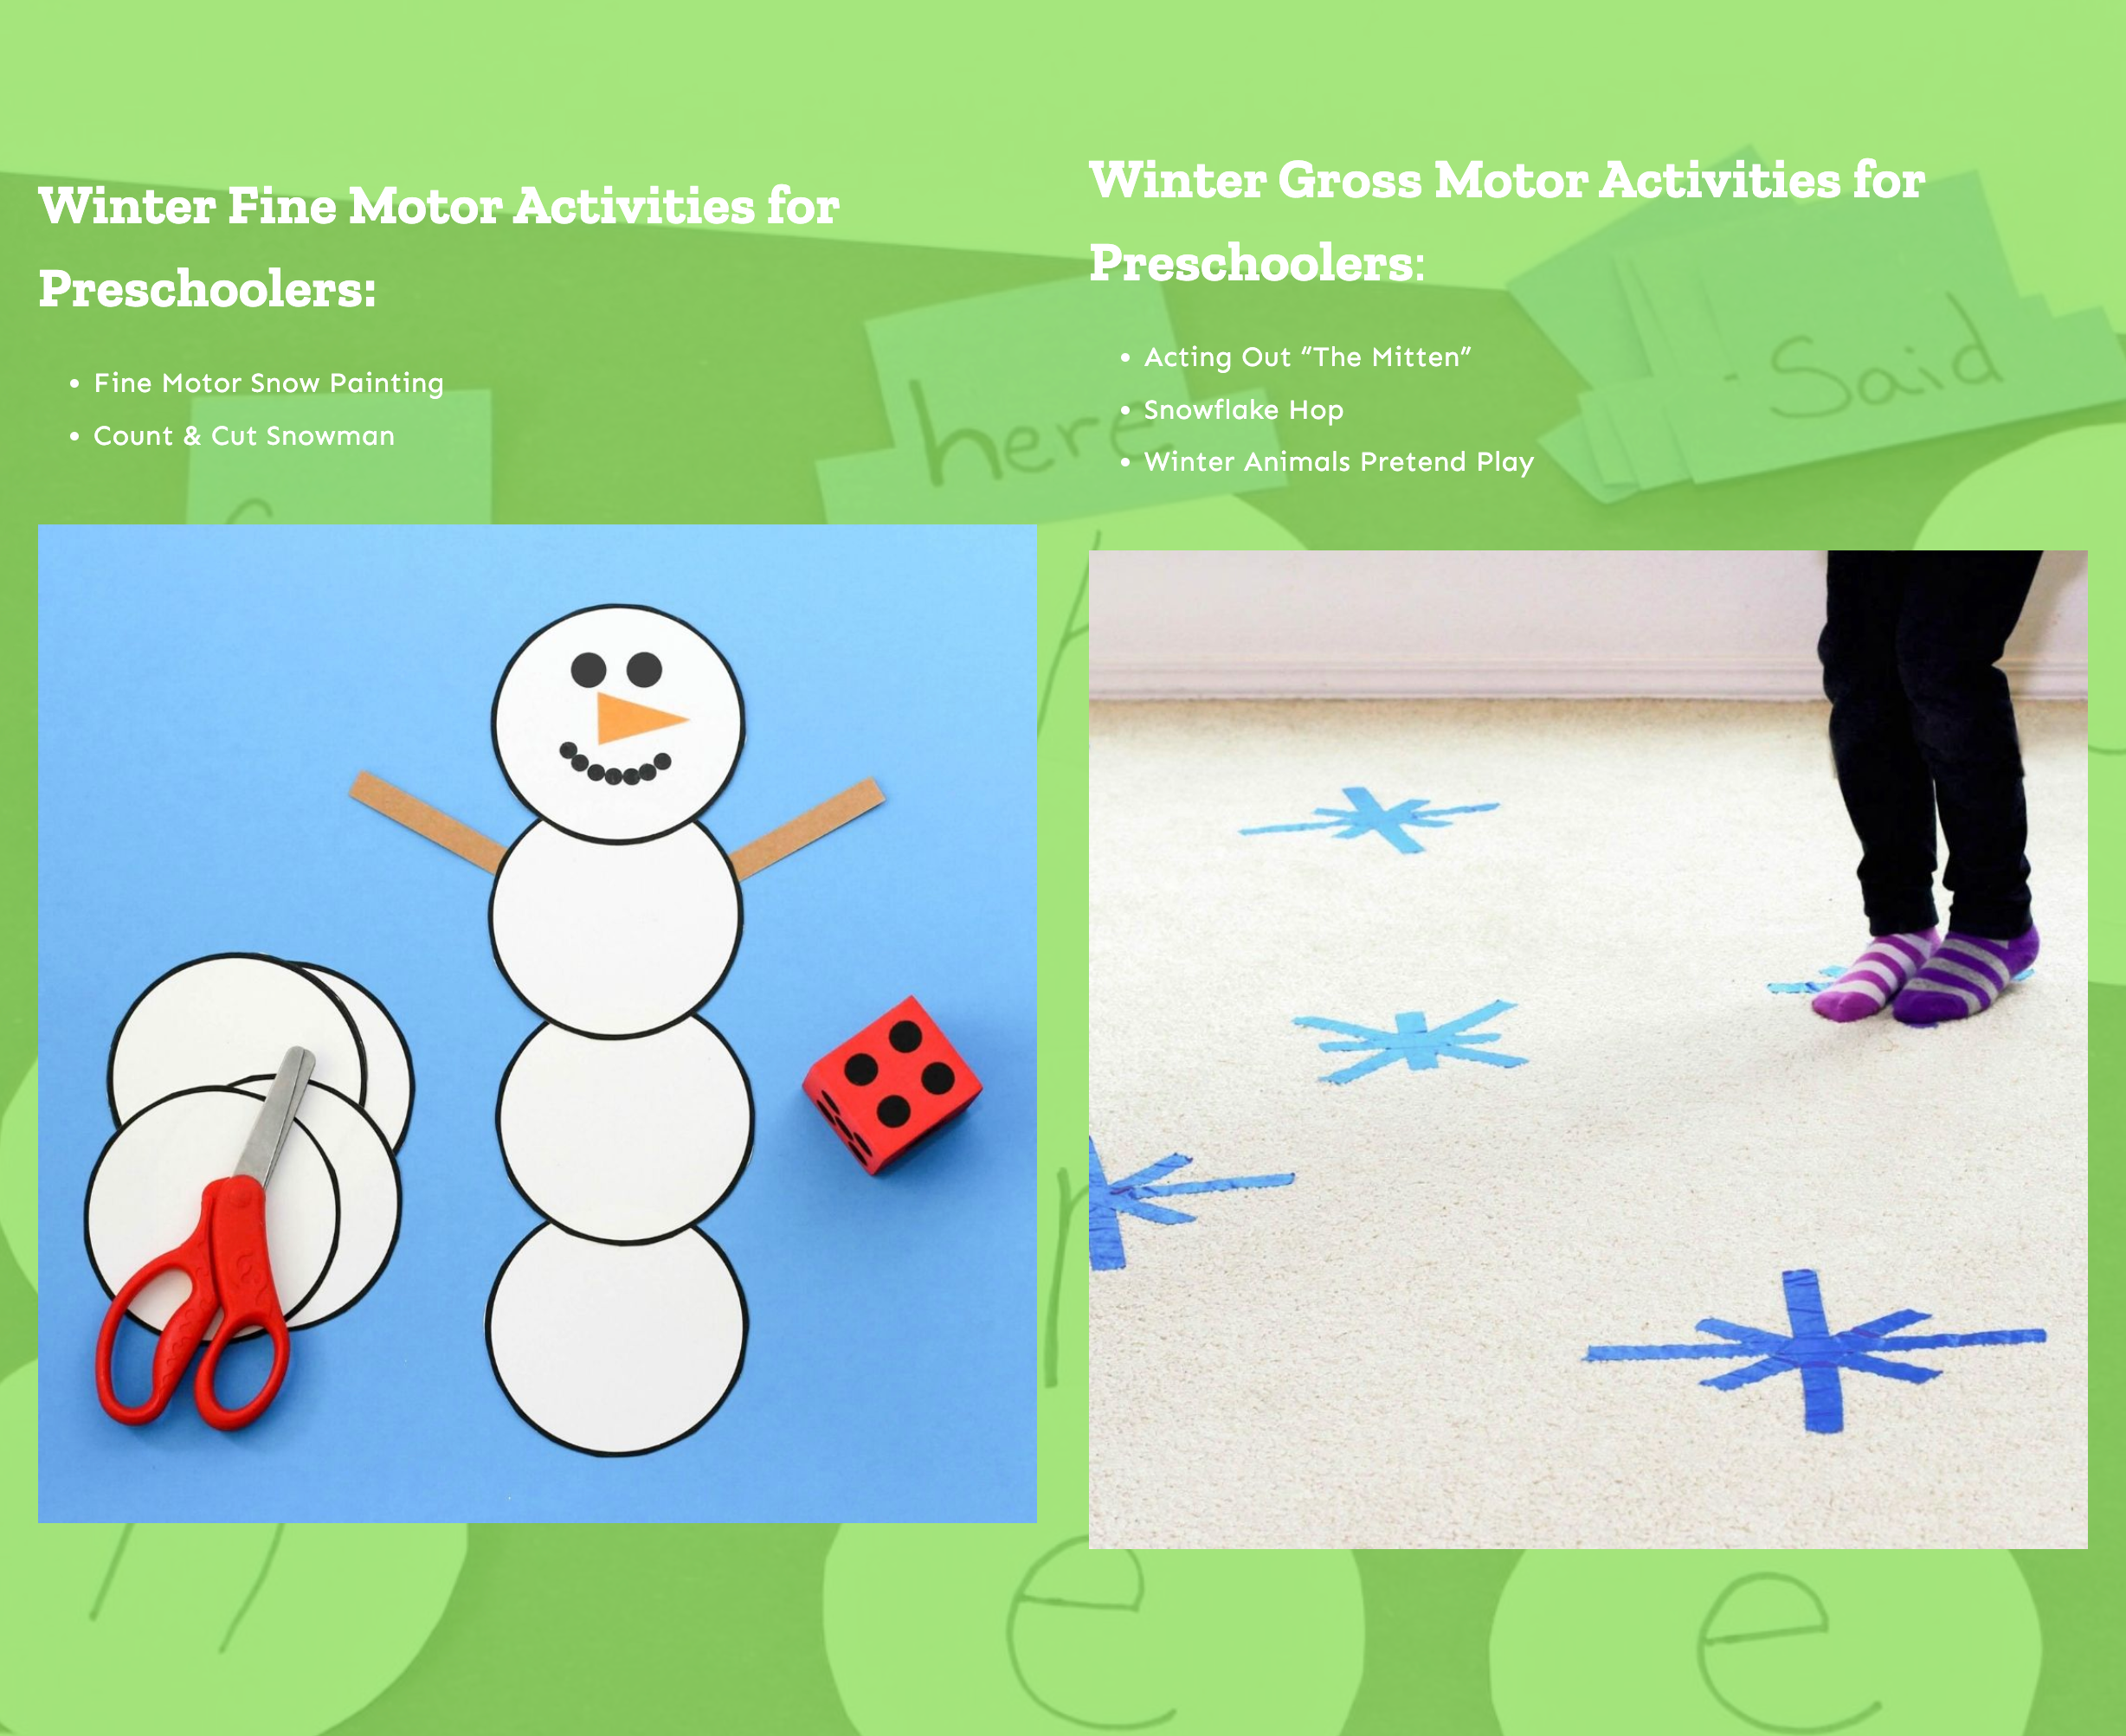 list of fine motor and gross motor activities included in the winter activity plans for preschoolers